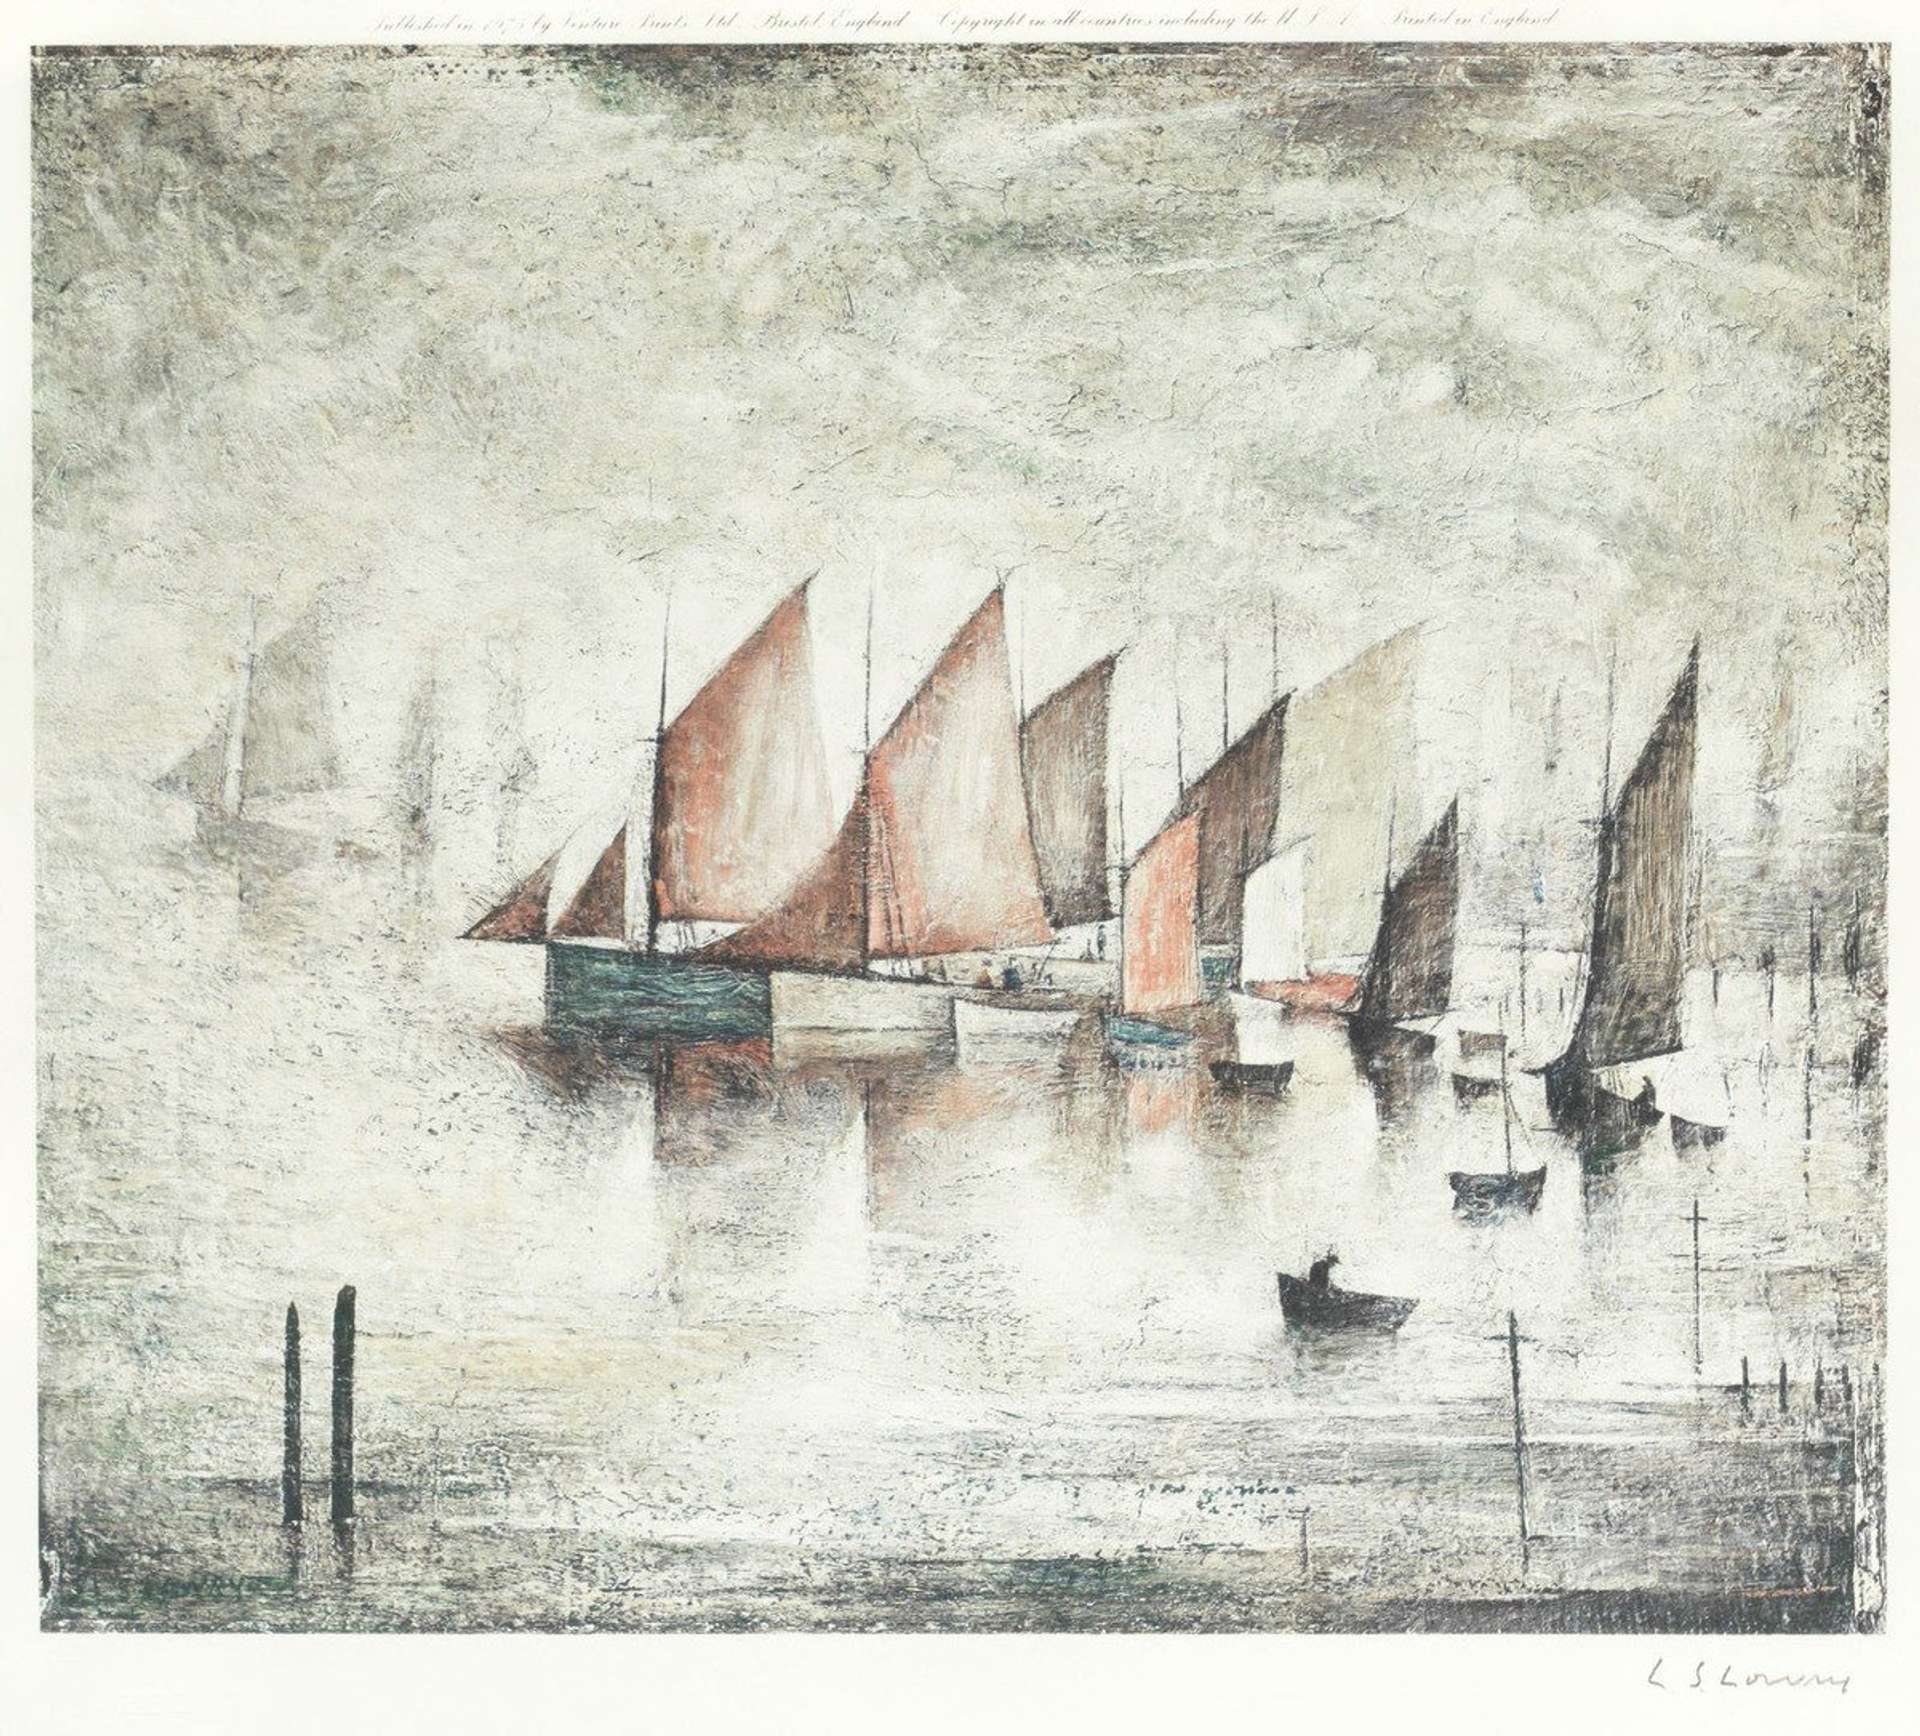 A Guide To Lowry’s Seascape Prints & Paintings